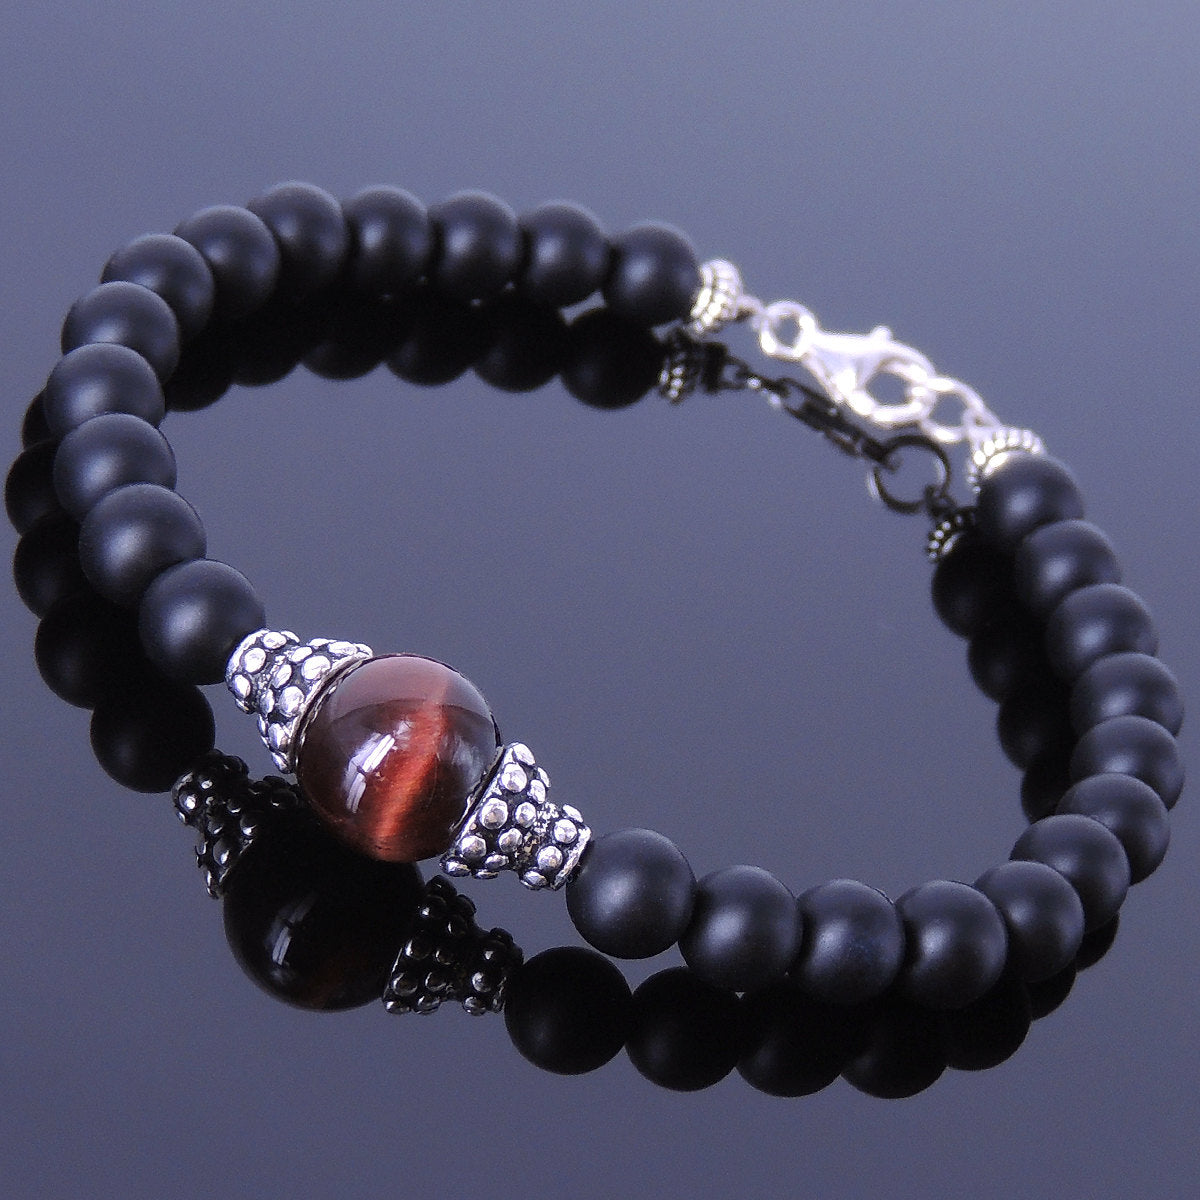 Red Tiger Eye & Matte Black Onyx Healing Gemstone Bracelet with S925 Sterling Silver Bead Caps & Clasp - Handmade by Gem & Silver BR170